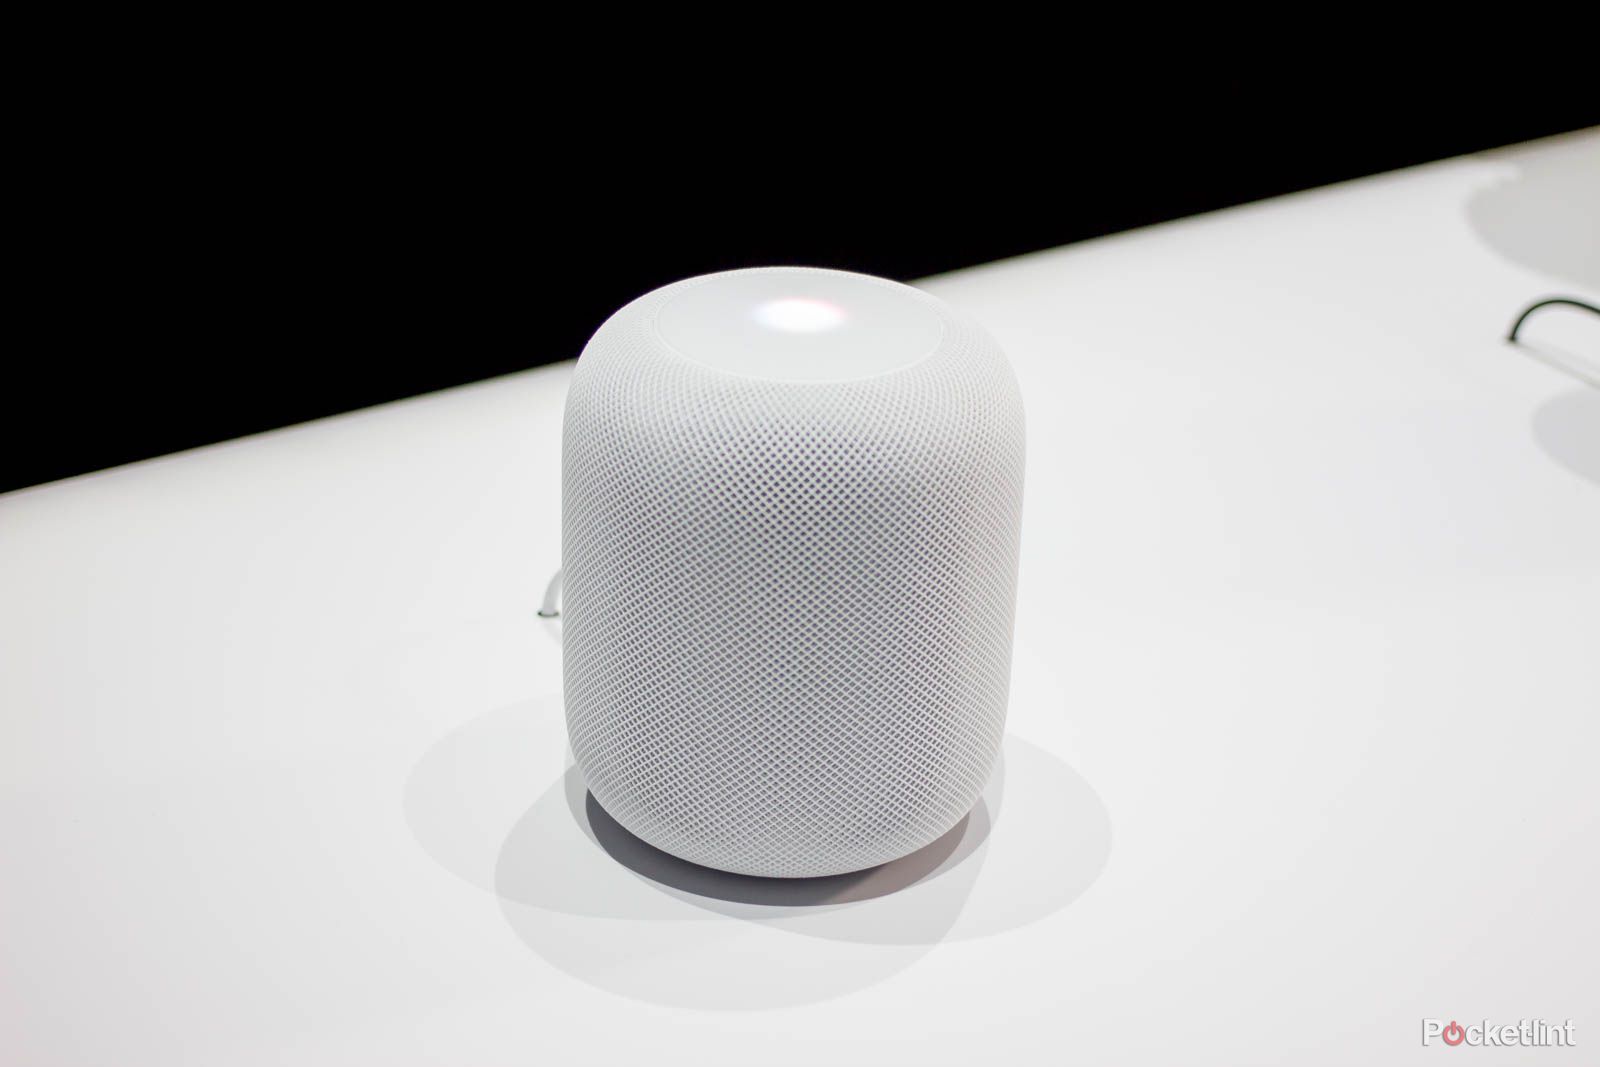 Apple could add Face ID tech to next HomePod so it can identify you image 1